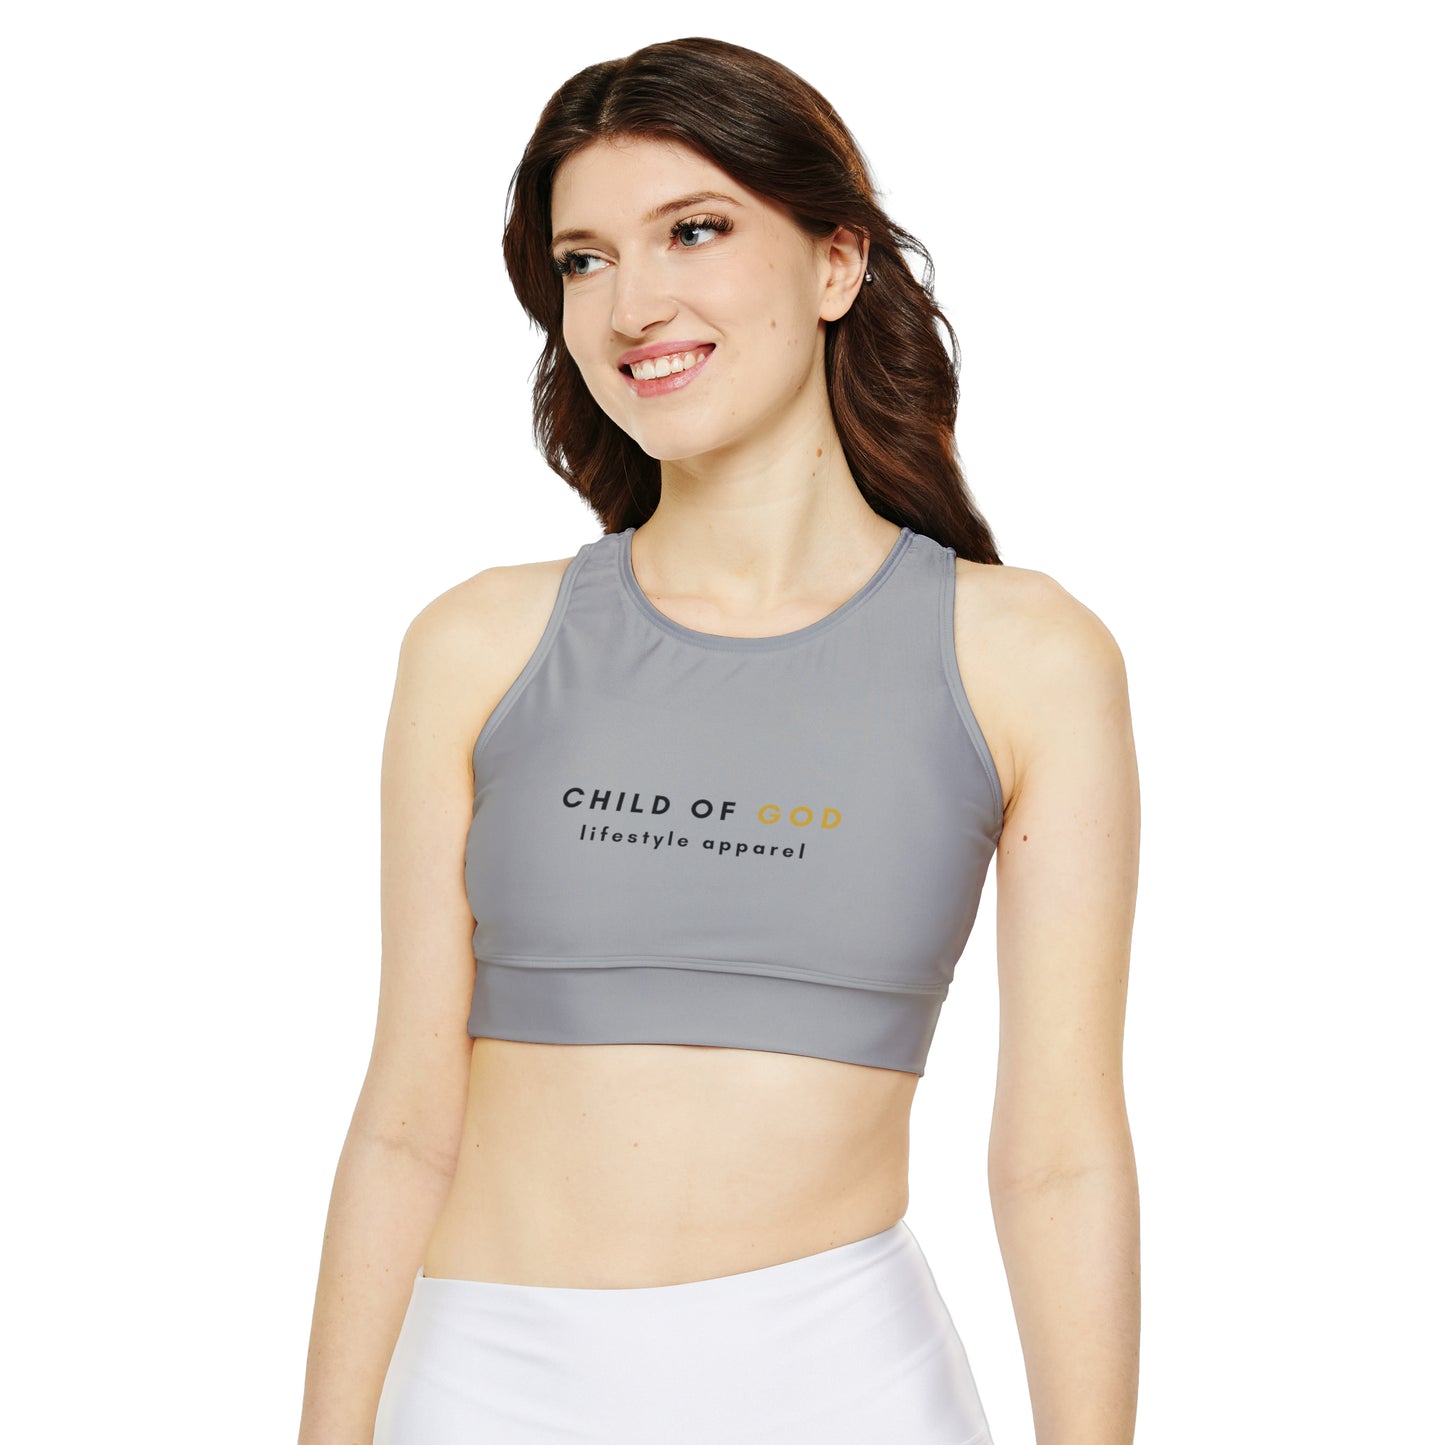 Meek Tribe Gold Touch - Fully Lined, Padded Sports Bra